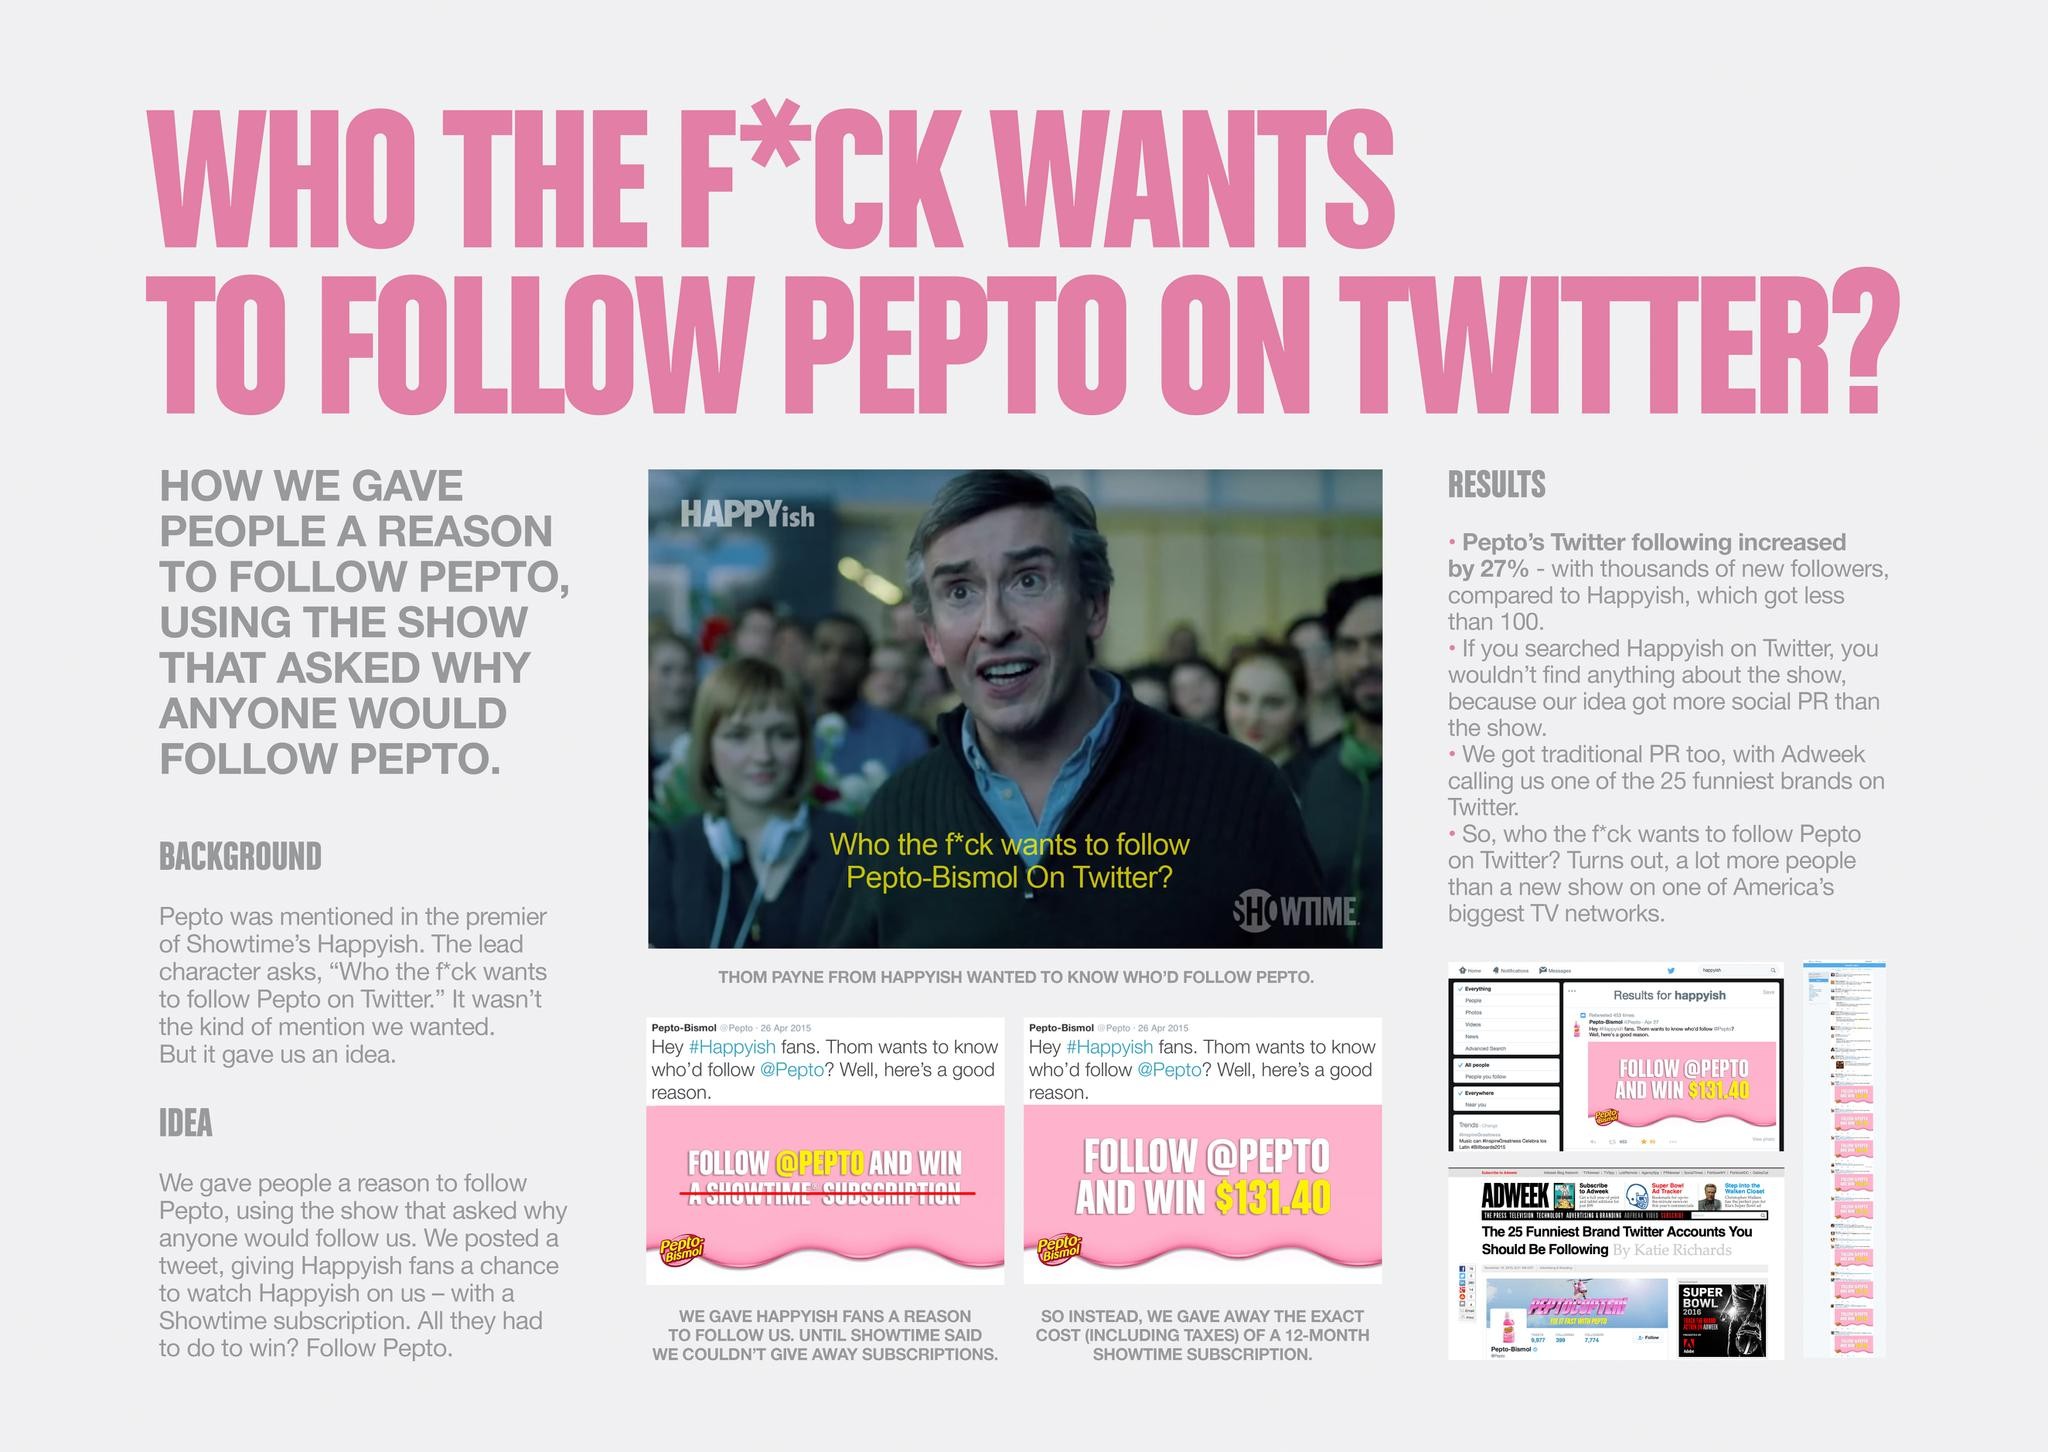 WHO THE F*CK WANTS TO FOLLOW PEPTO ON TWITTER?